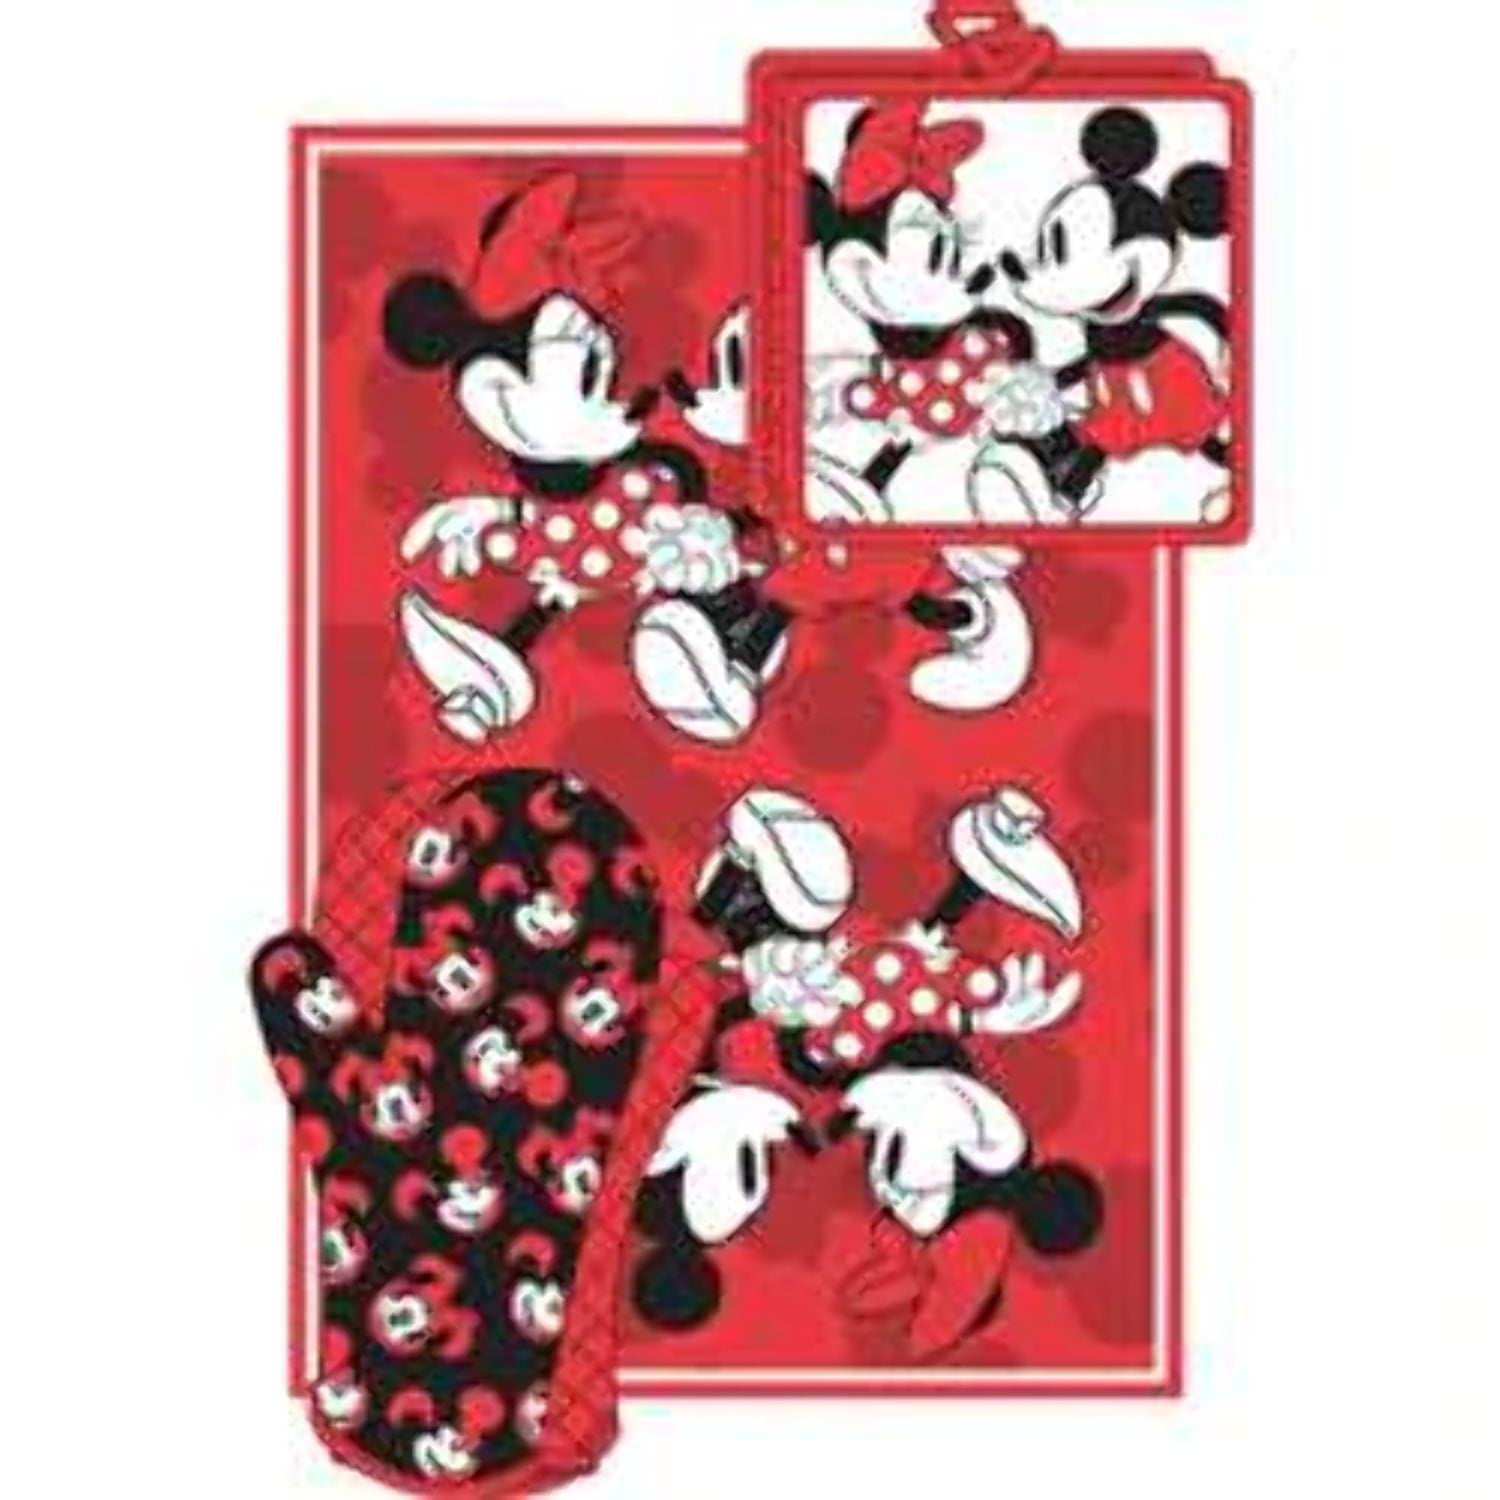 Kitchen Towel Love Valentine's Day Holiday NEW! Disney MICKEY & MINNIE MOUSE 1 